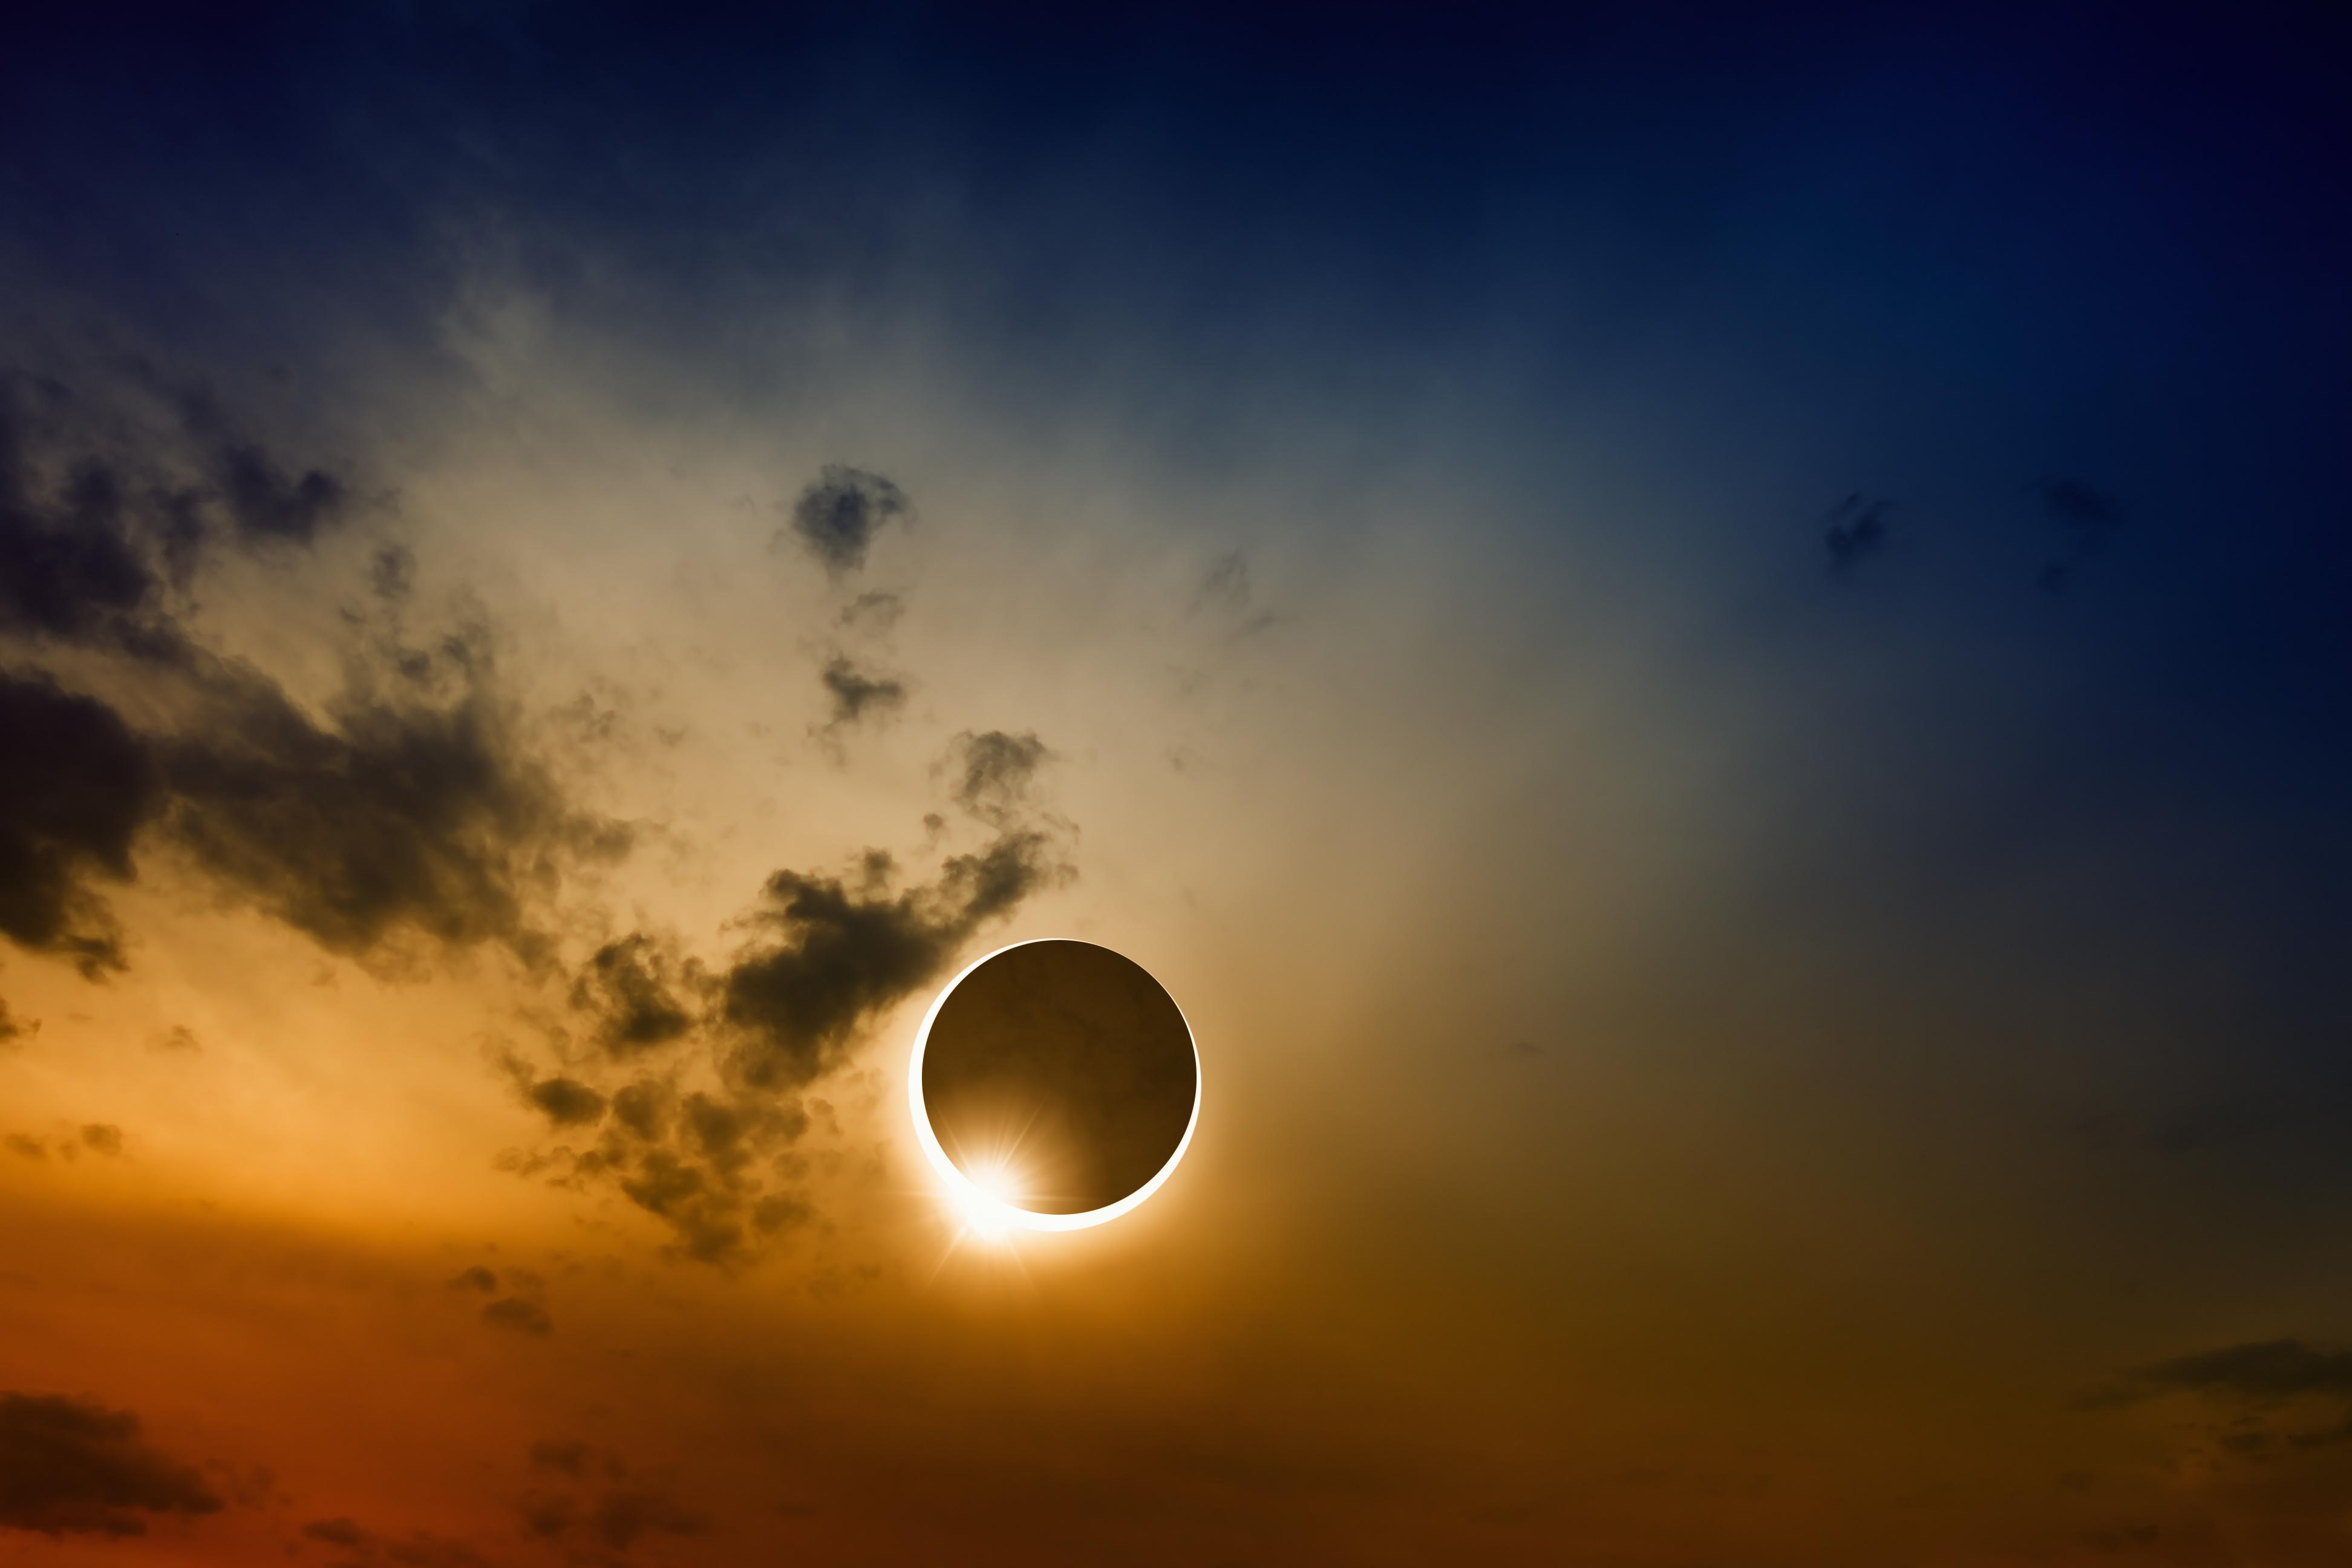 Total eclipse of the sun behind the moon